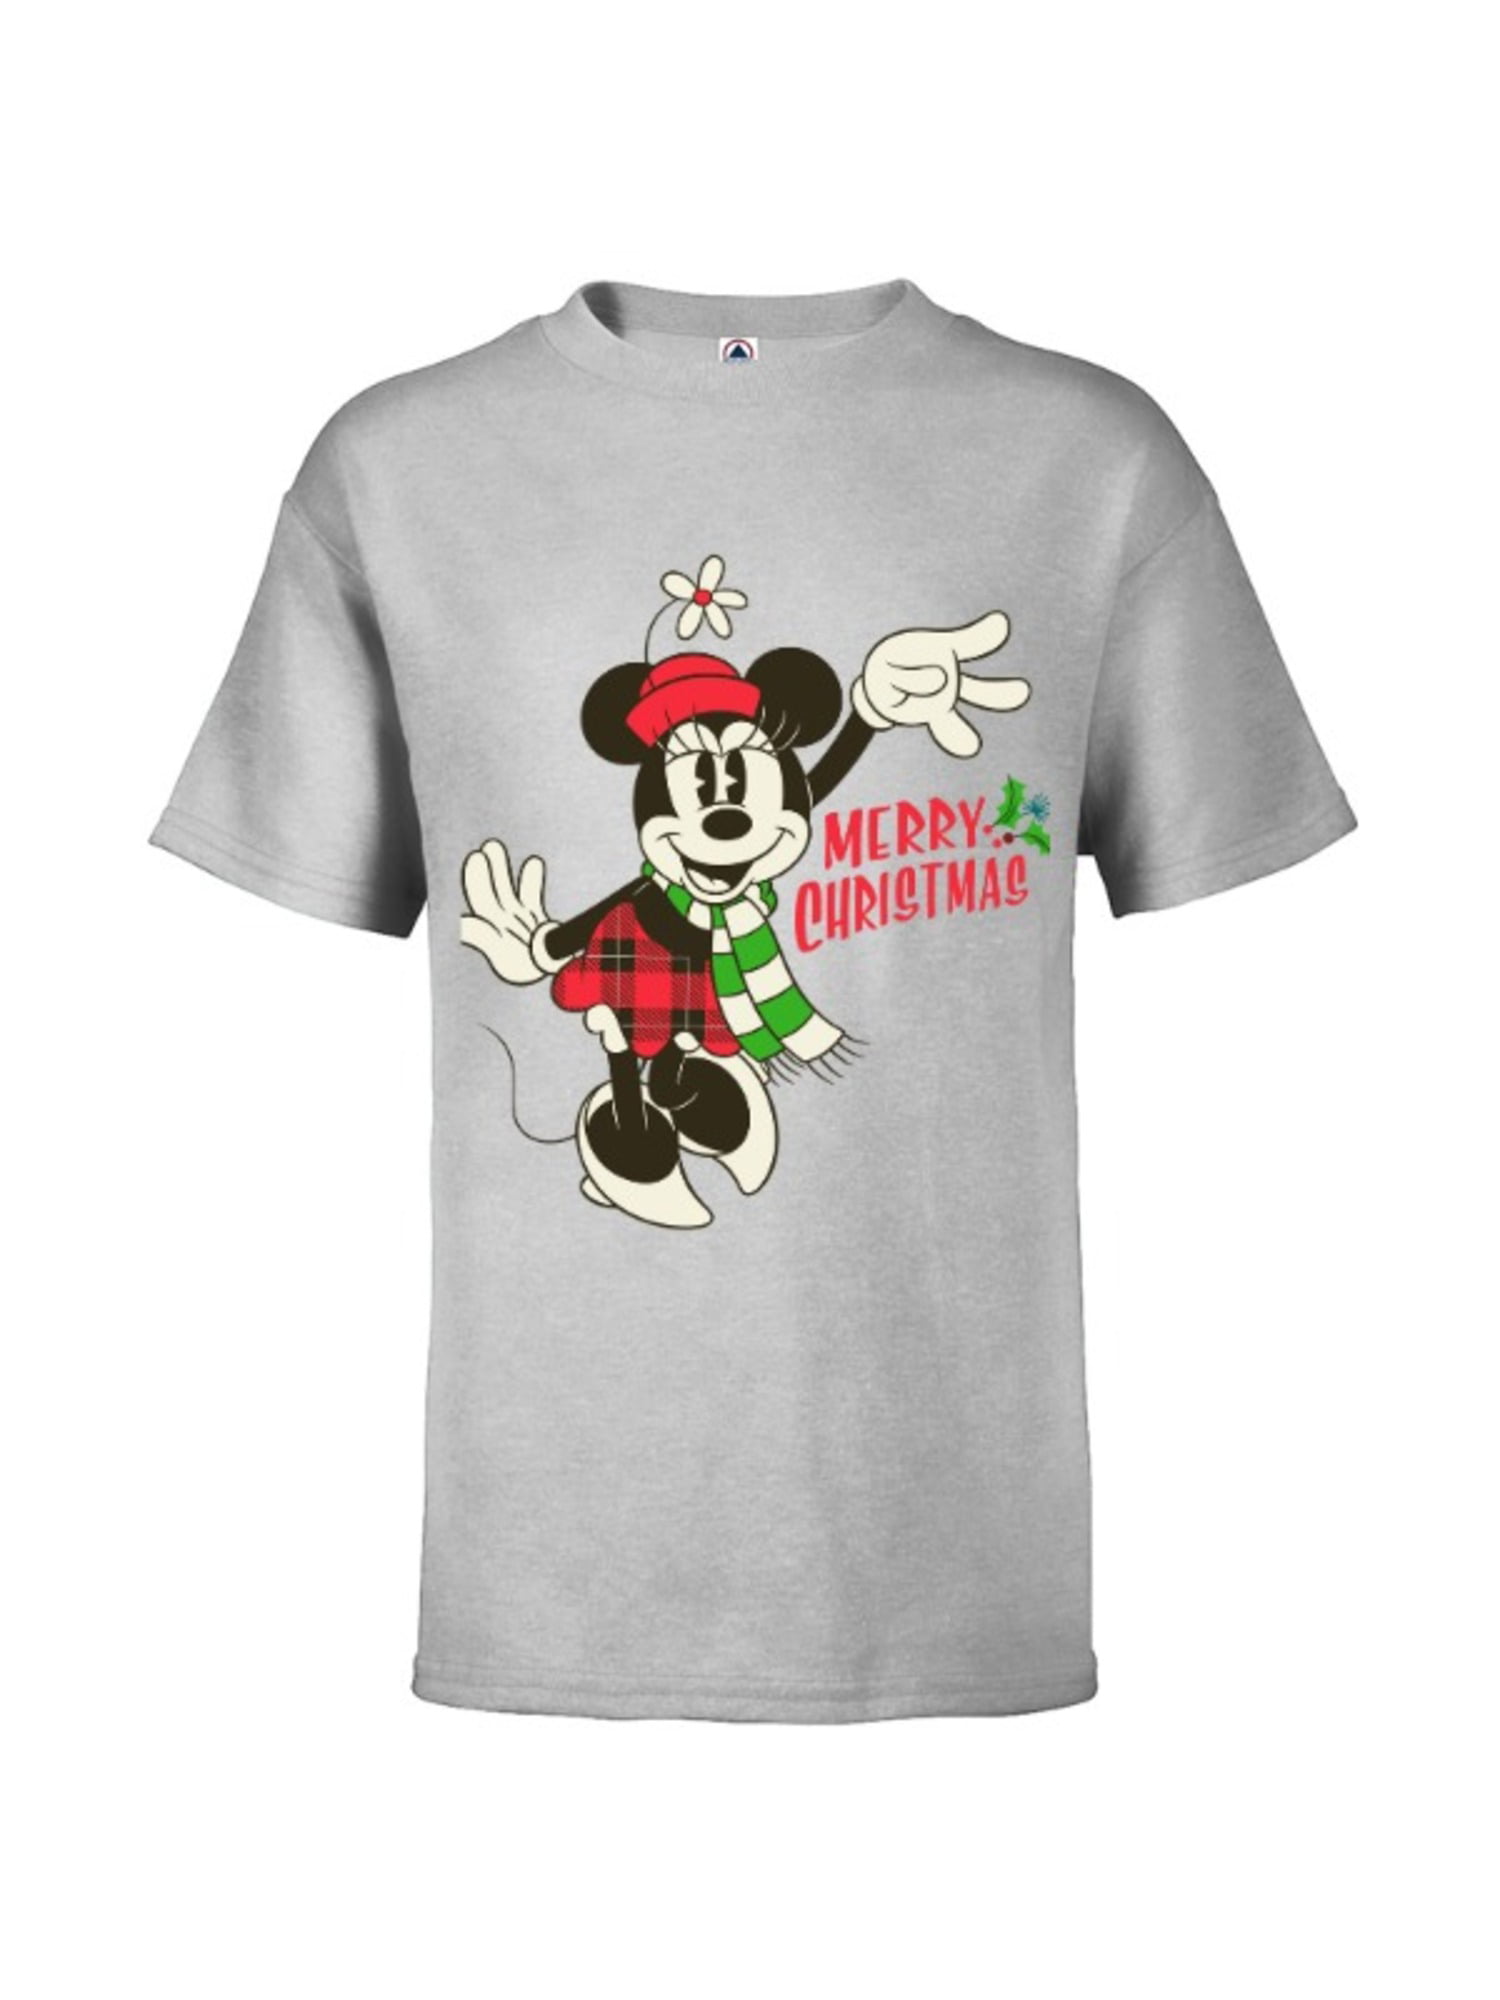 14 Disney Store Minnie Mouse Classic T-Shirt for Girls New W/Tag Gray XL 